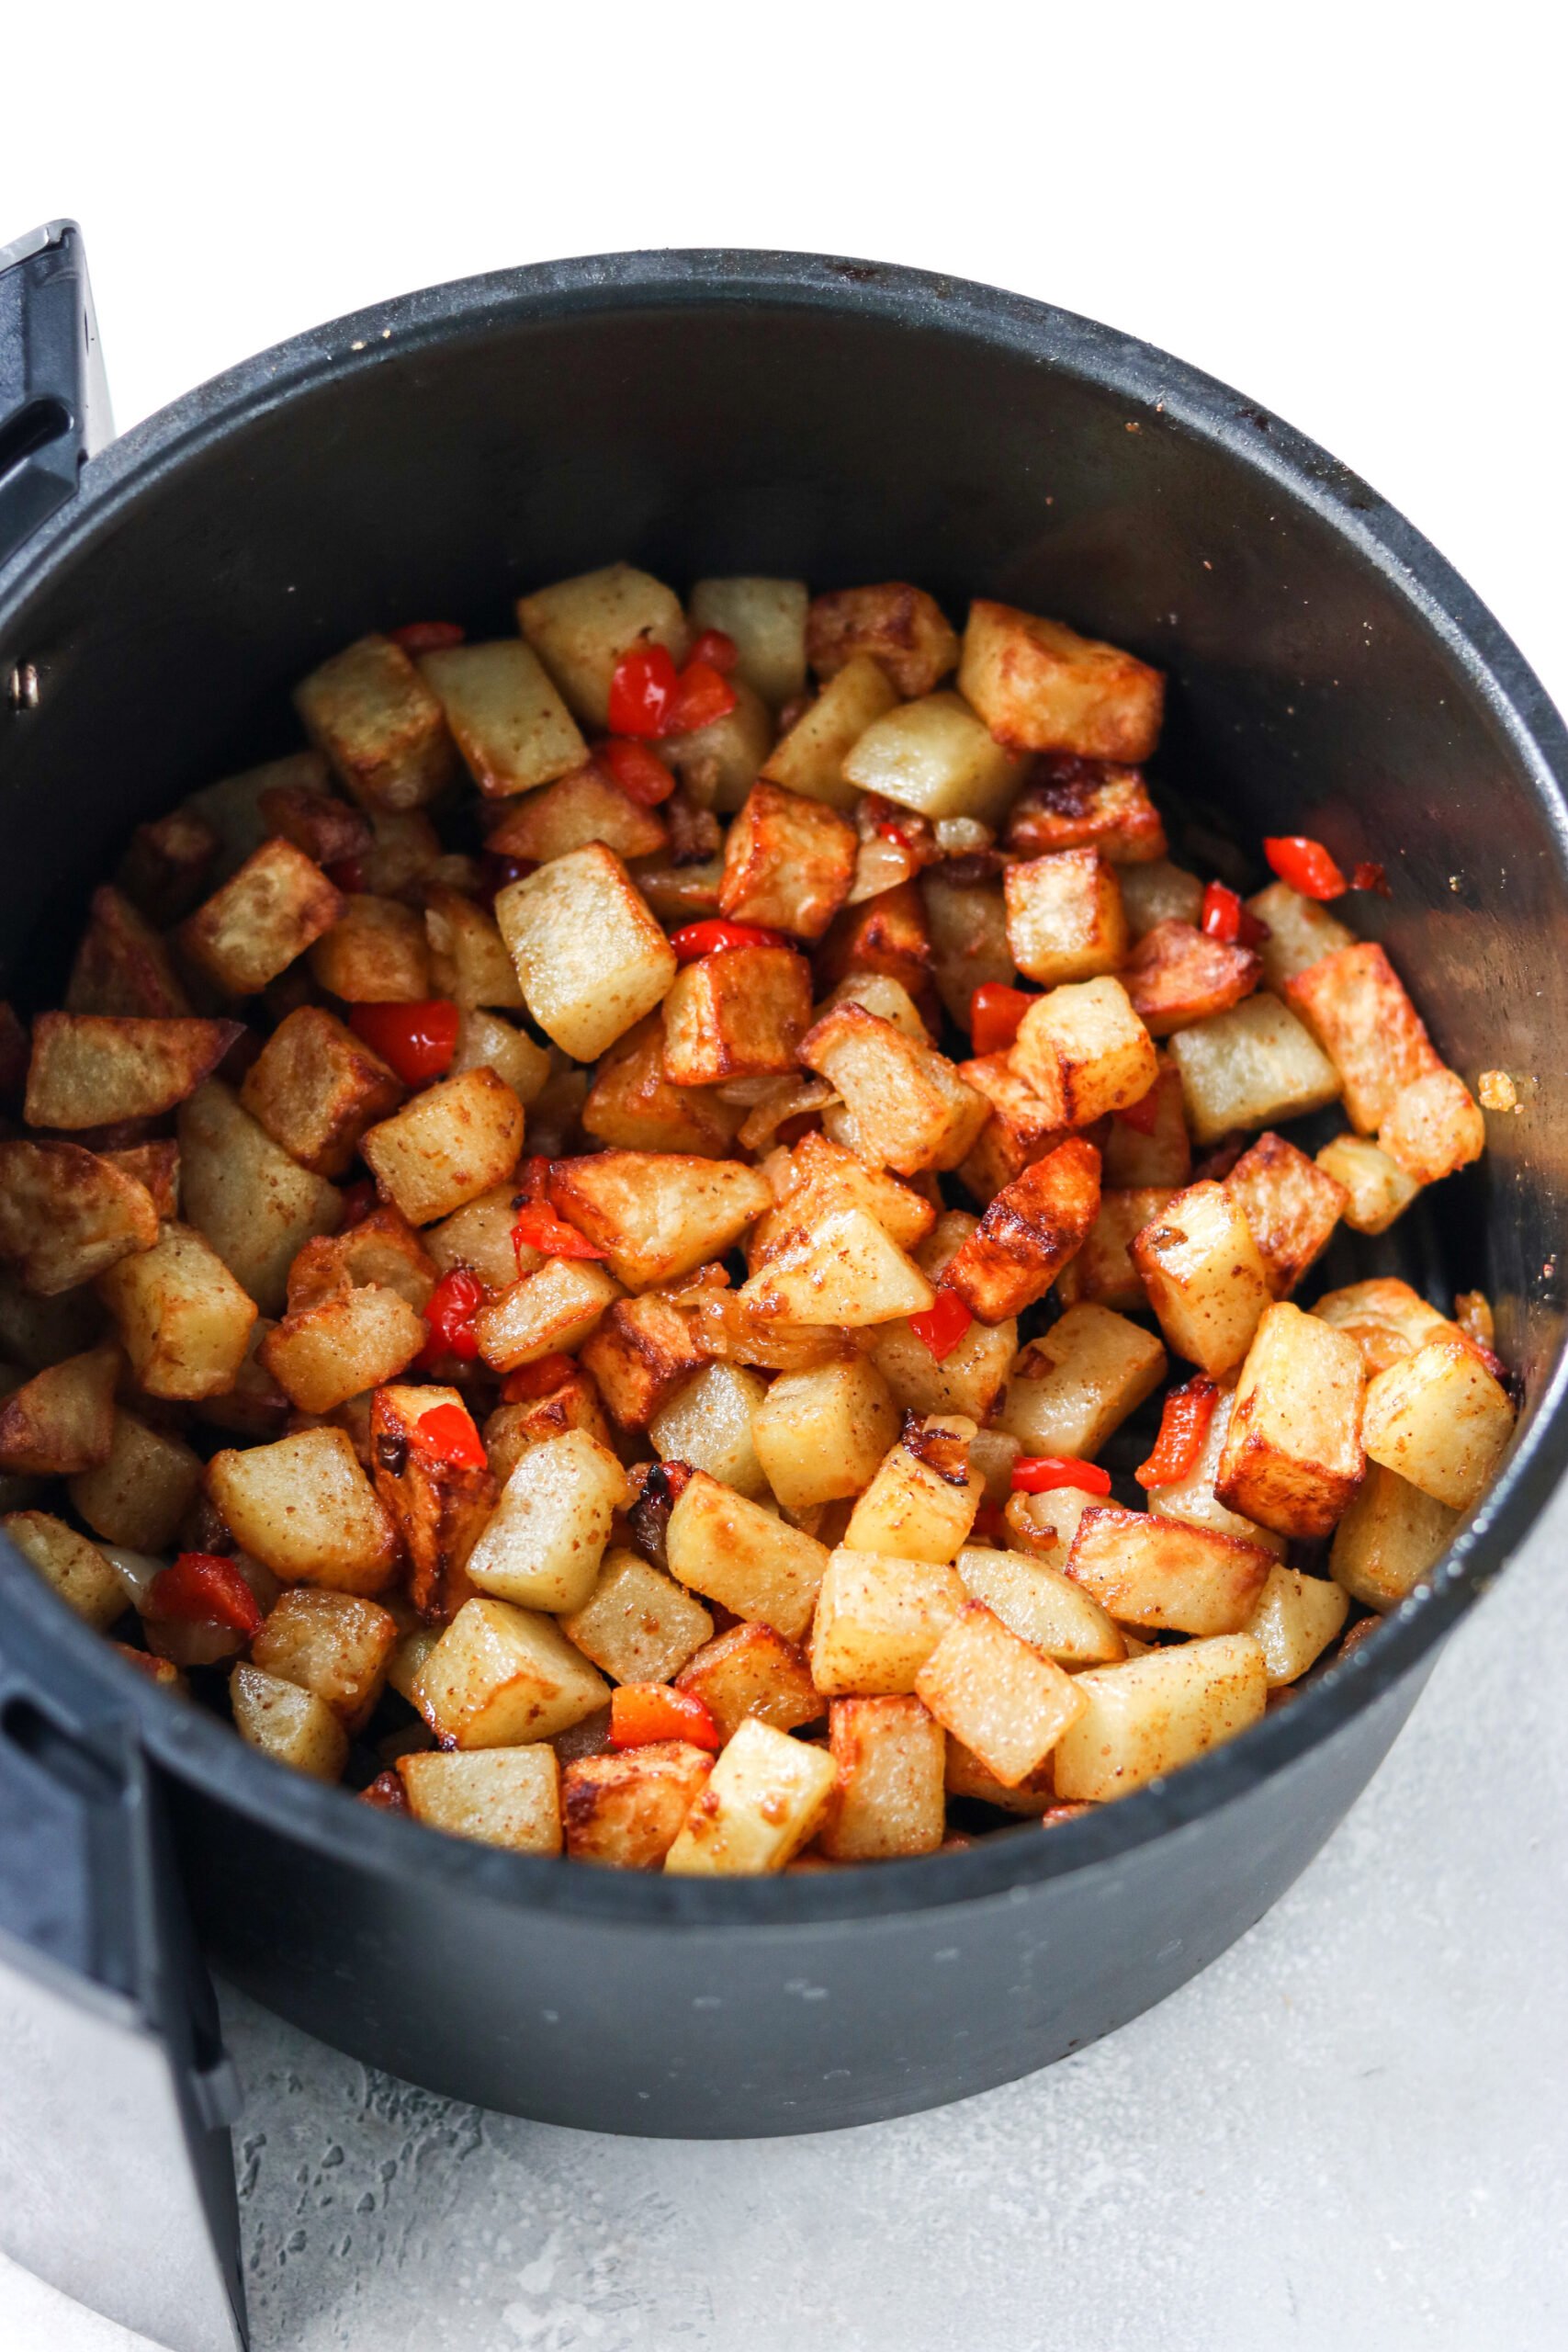 cubed potatoes with bell pepper and onion in an air fryer basket